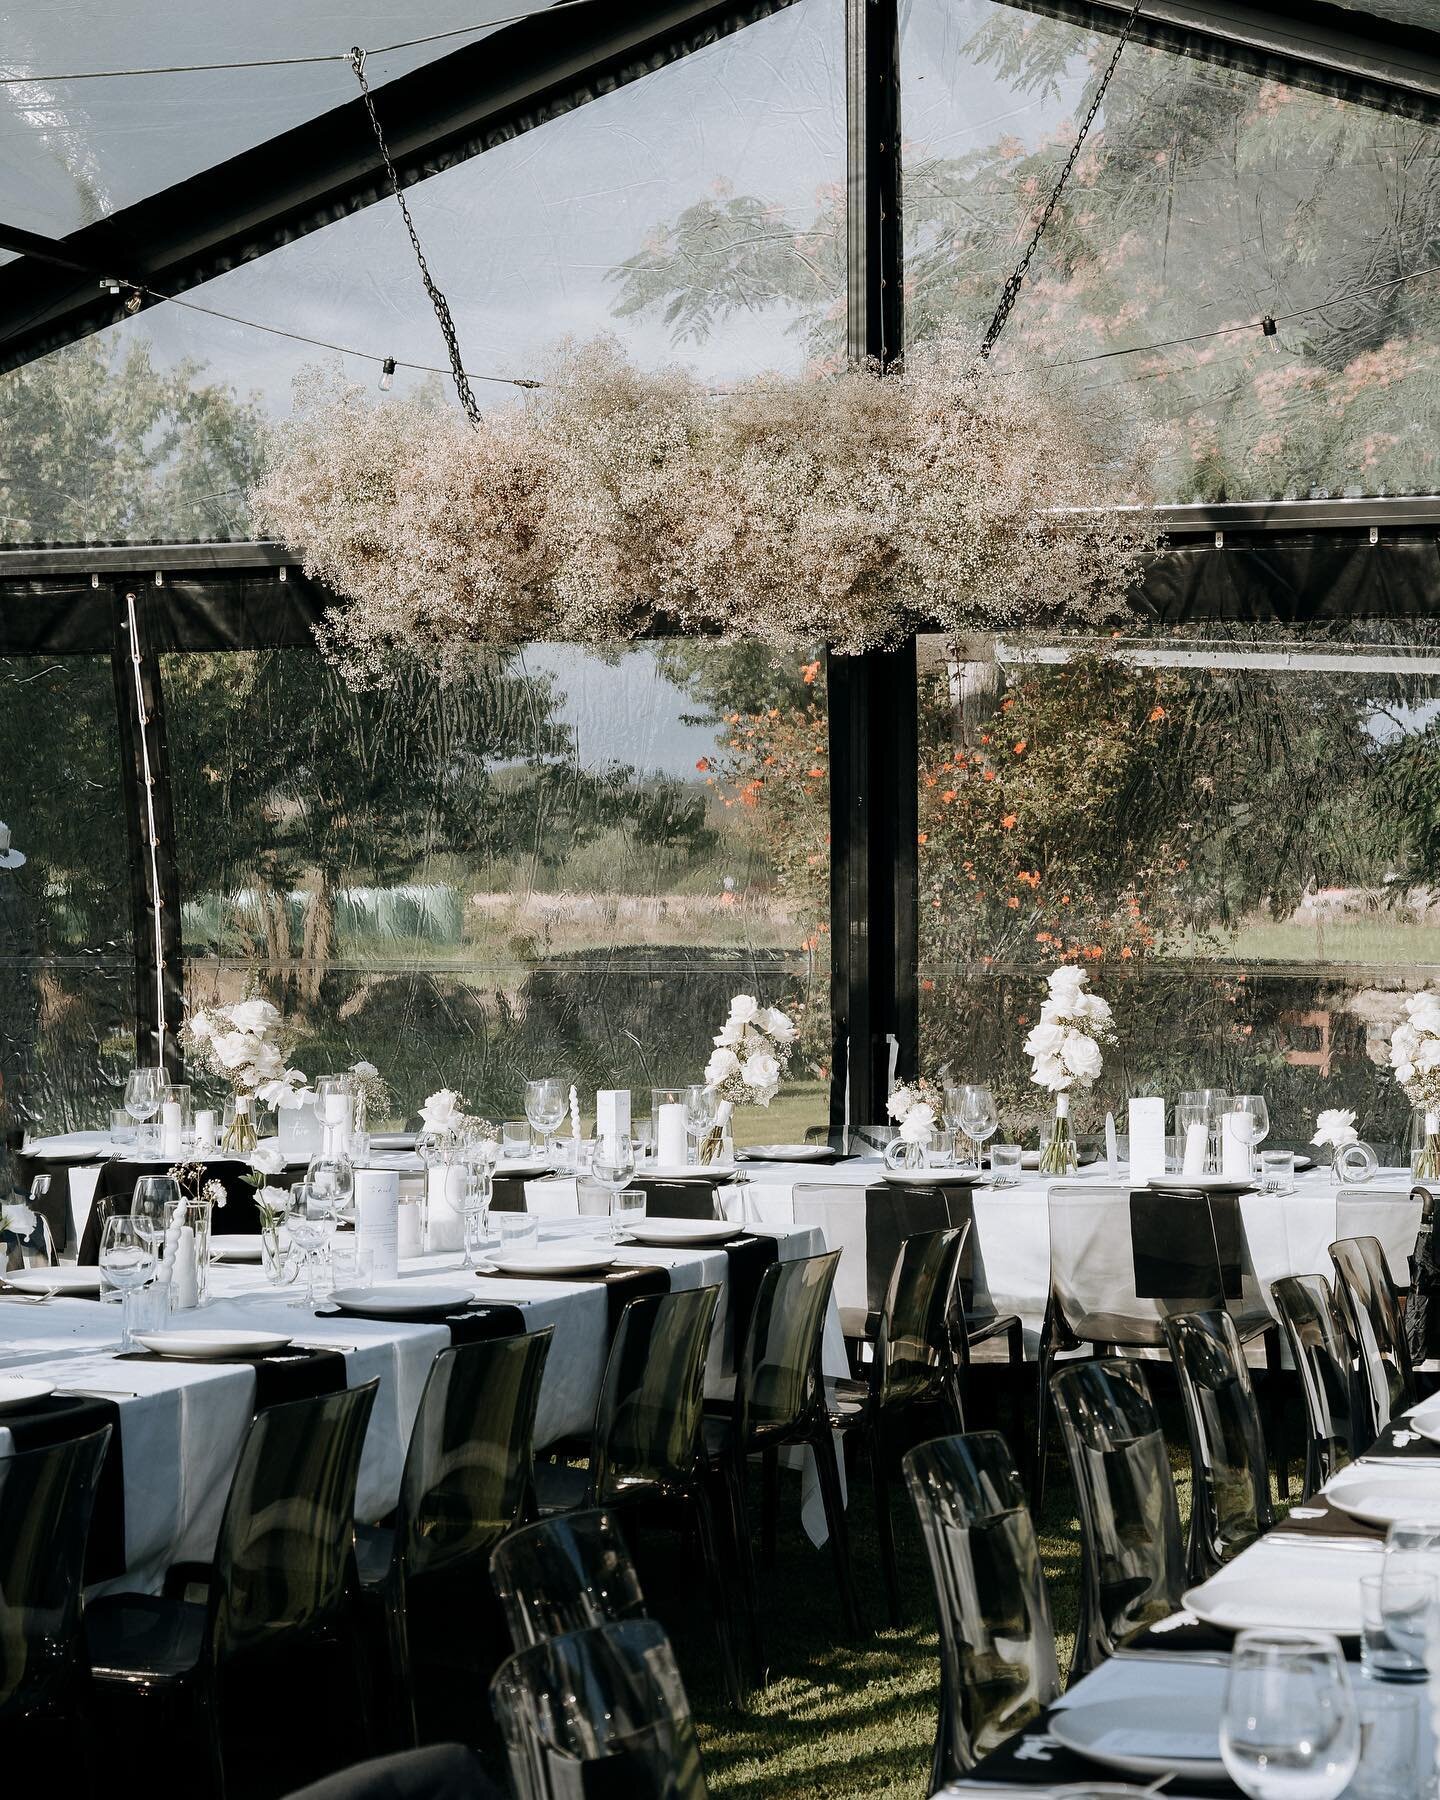 &ldquo;We were really pleased that we splurged on getting all the florals that we wanted, and the big clear marquee. The latter was a late addition to the plan &ndash; but it really made the reception venue and the vendors were a dream to work with.&